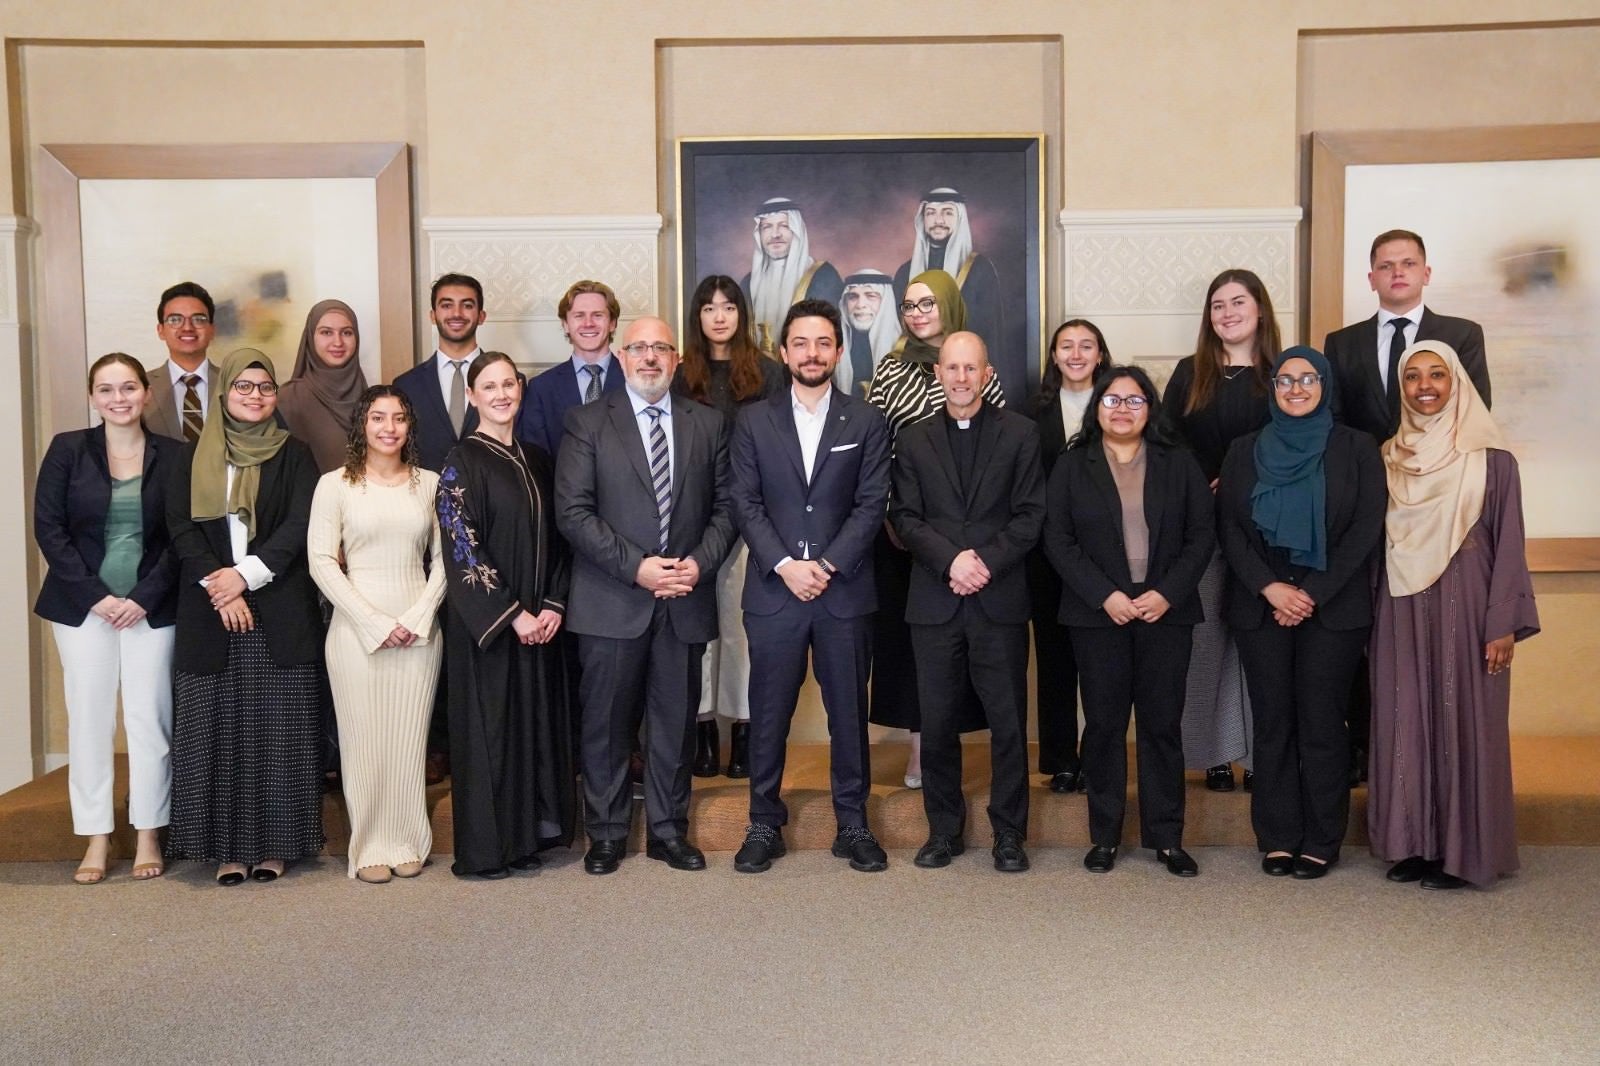 His Royal Highness Crown Prince Al Hussein bin Abdullah II standing in the center between Fr. Matthew Carnes, Imam Yahya Hendi, and a group of students.